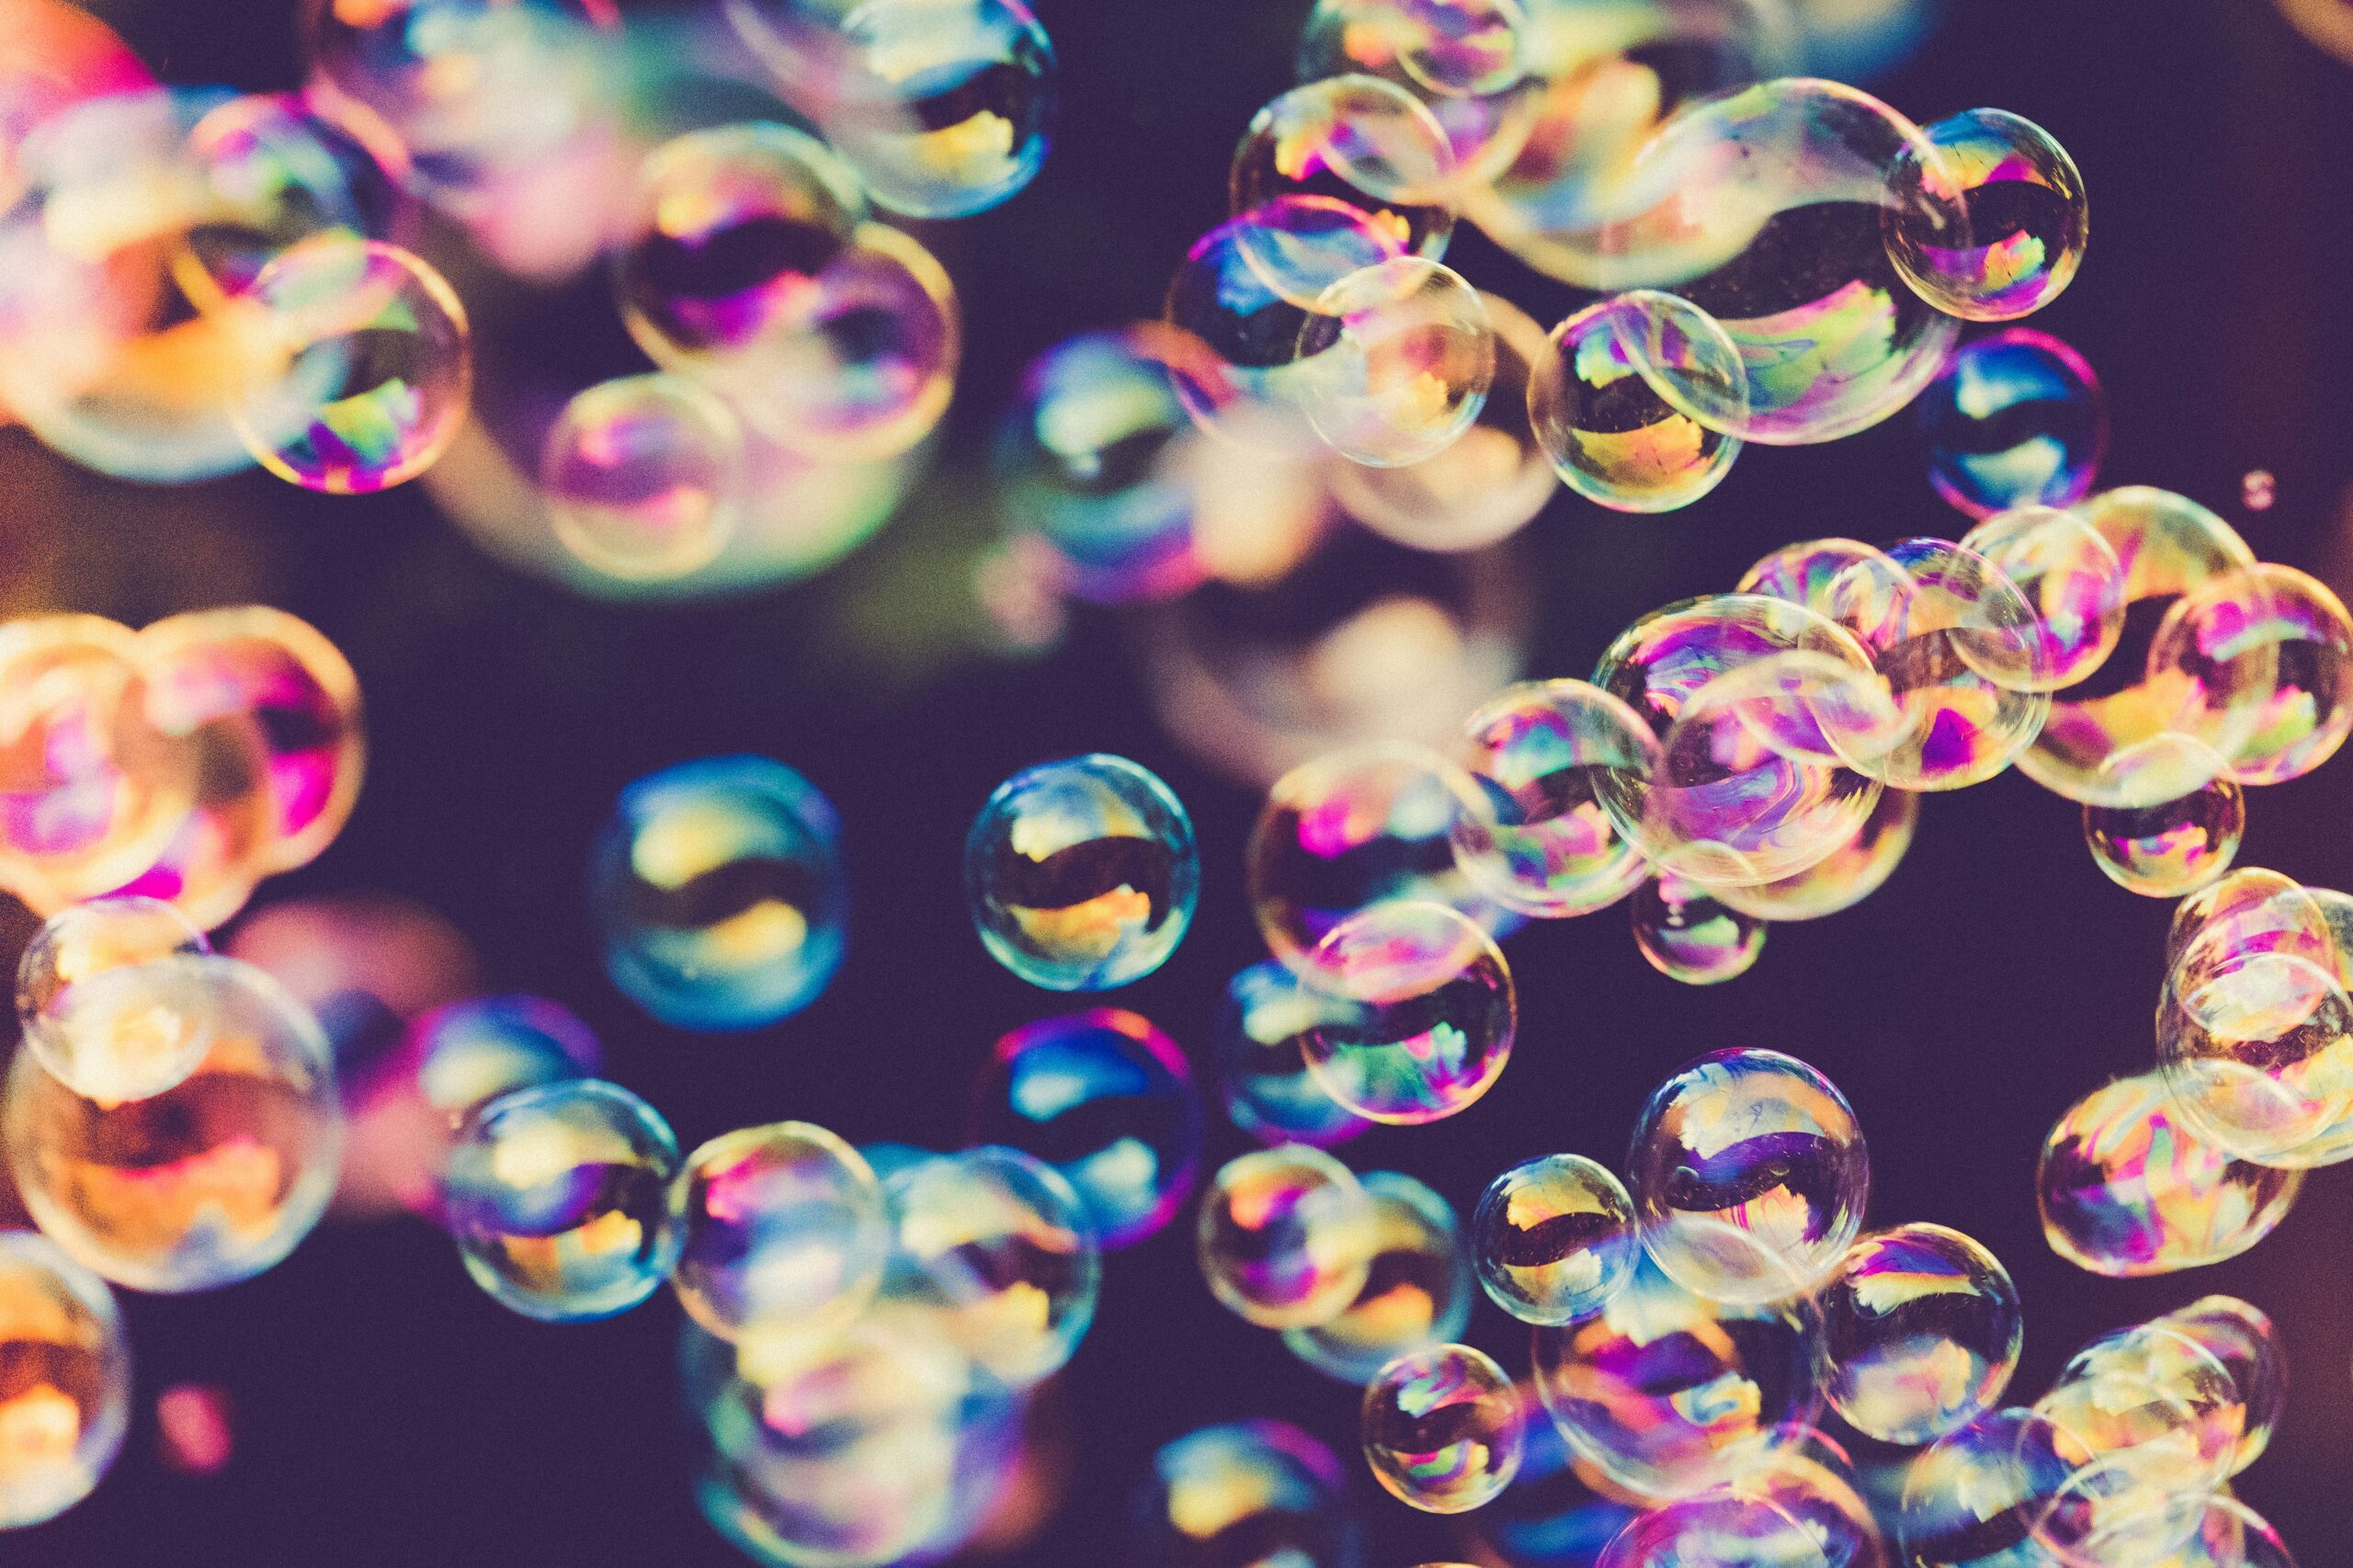 I don’t want to burst your bubble….